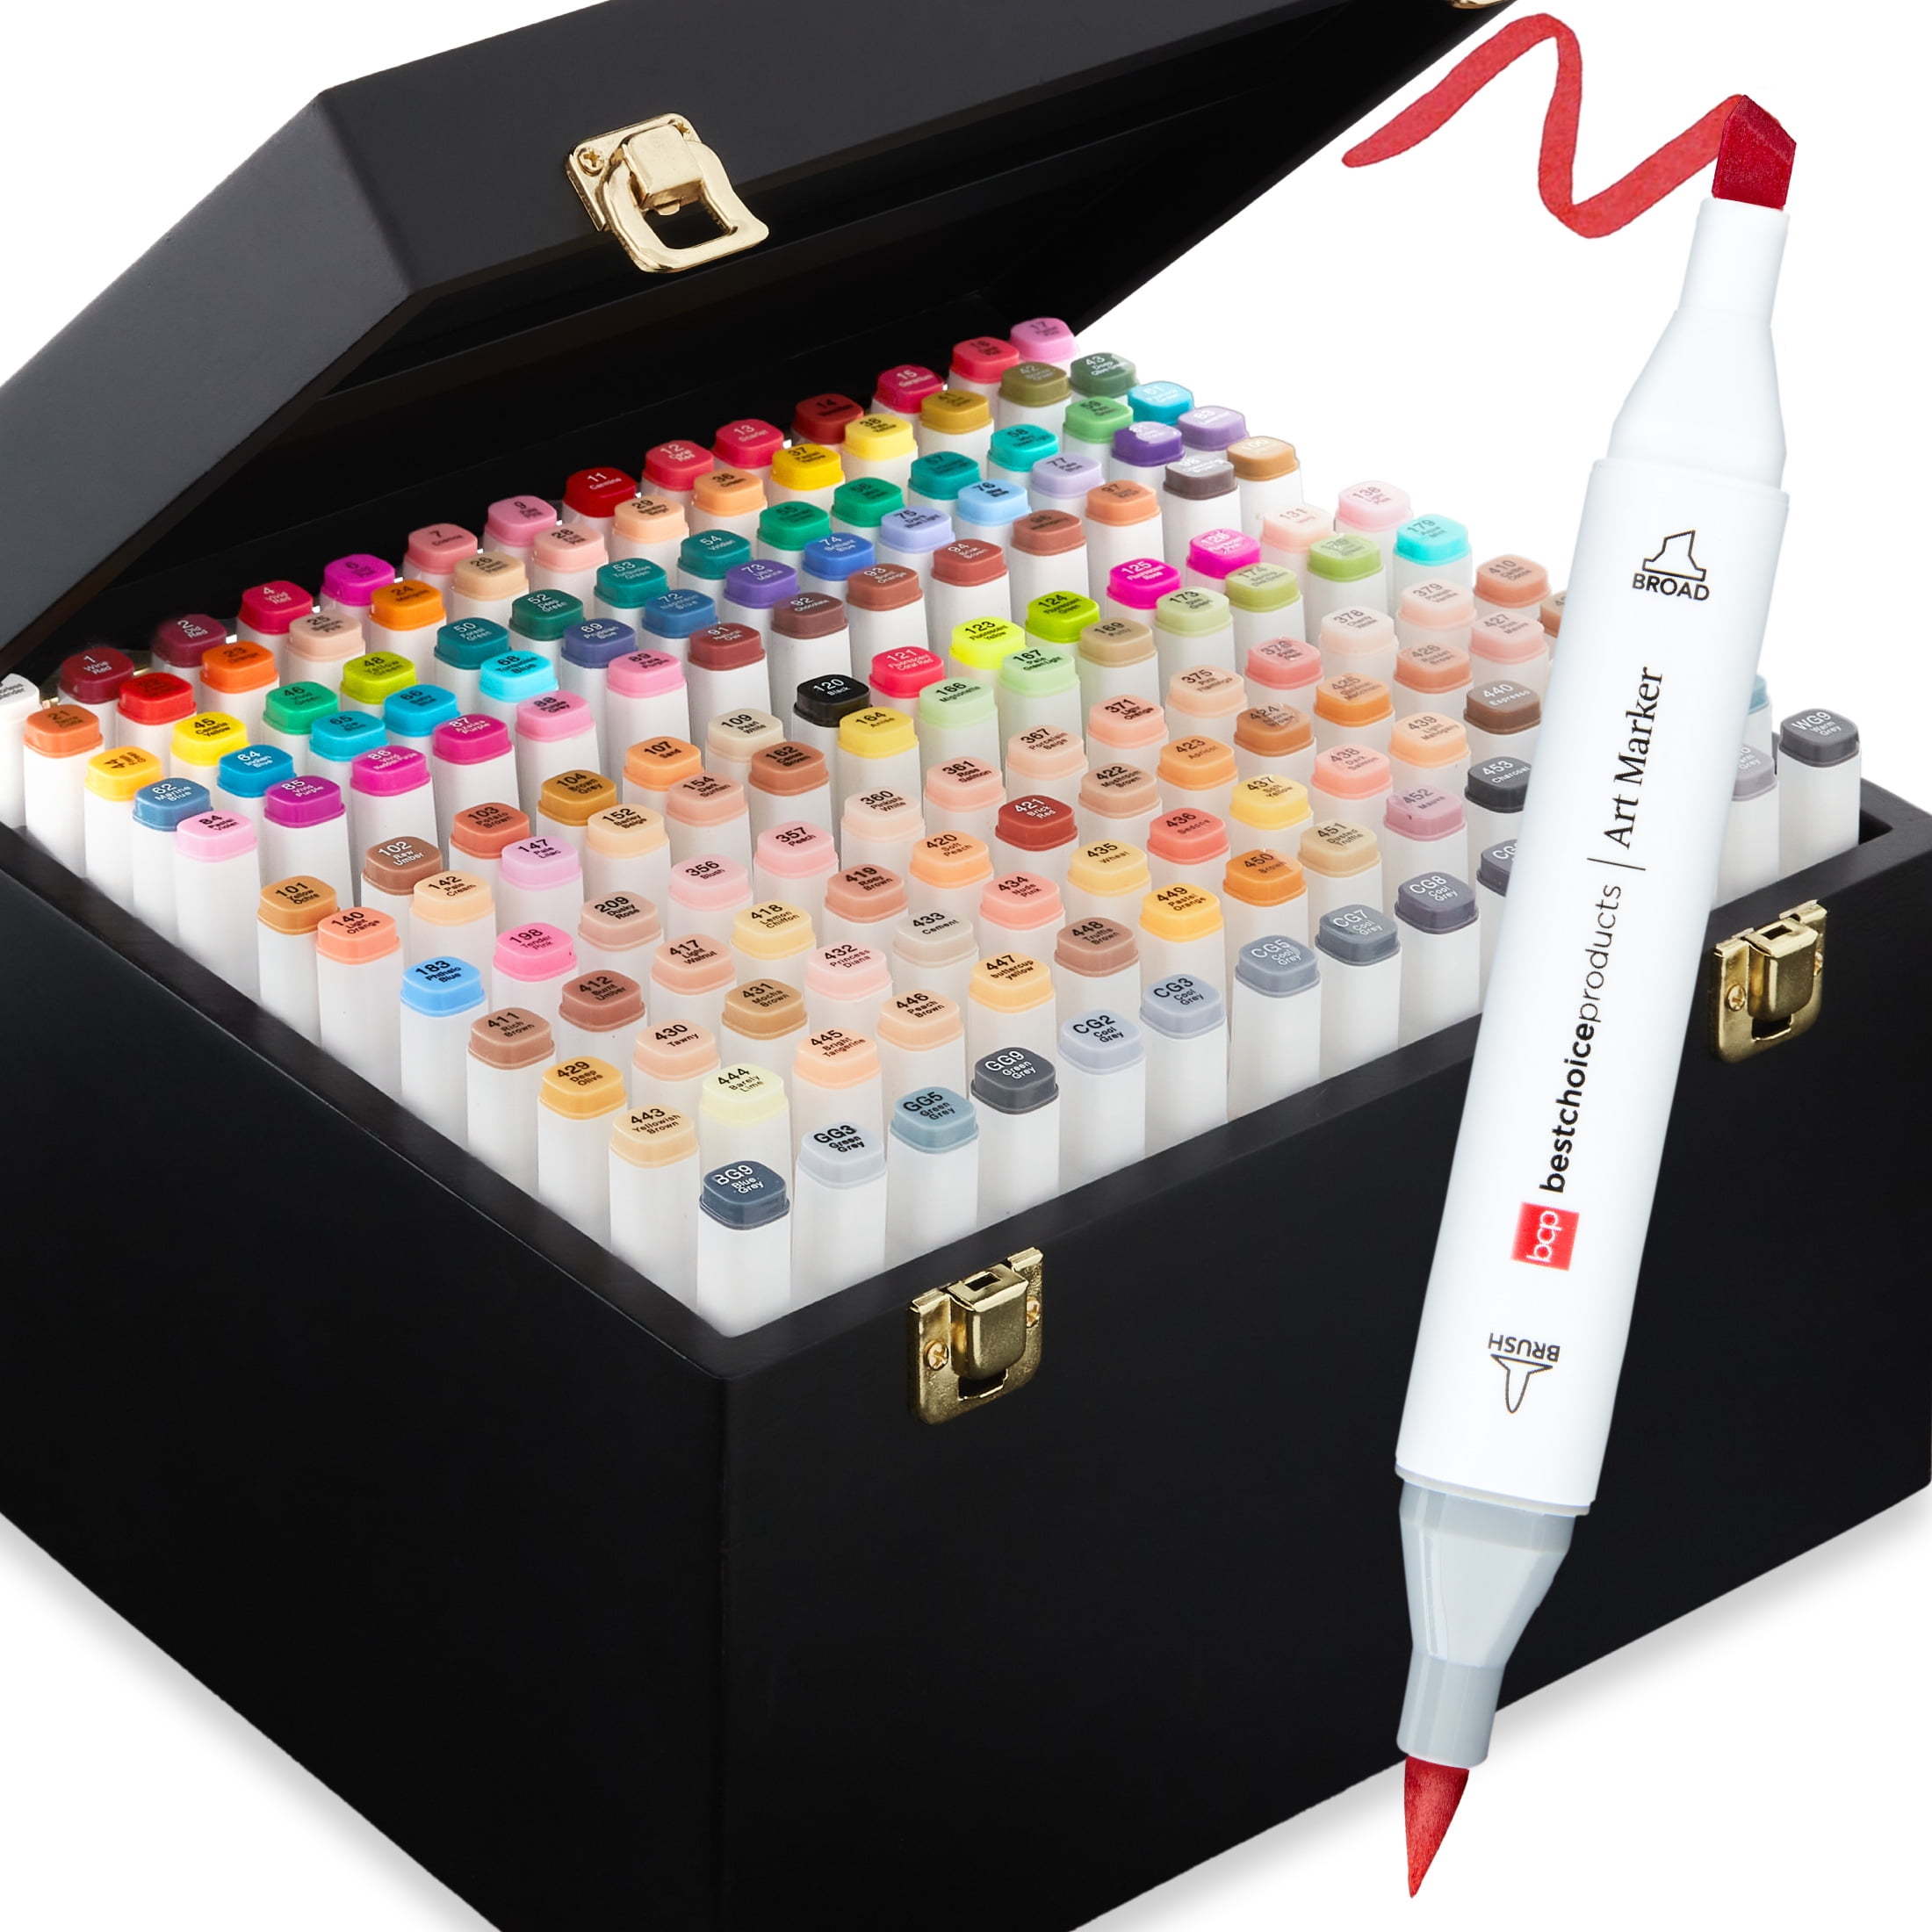 Best Choice Products Set of 168 Alcohol-Based Markers, Dual-Tipped Pens w/ Brush & Chisel Tip, Carrying Case - Natural